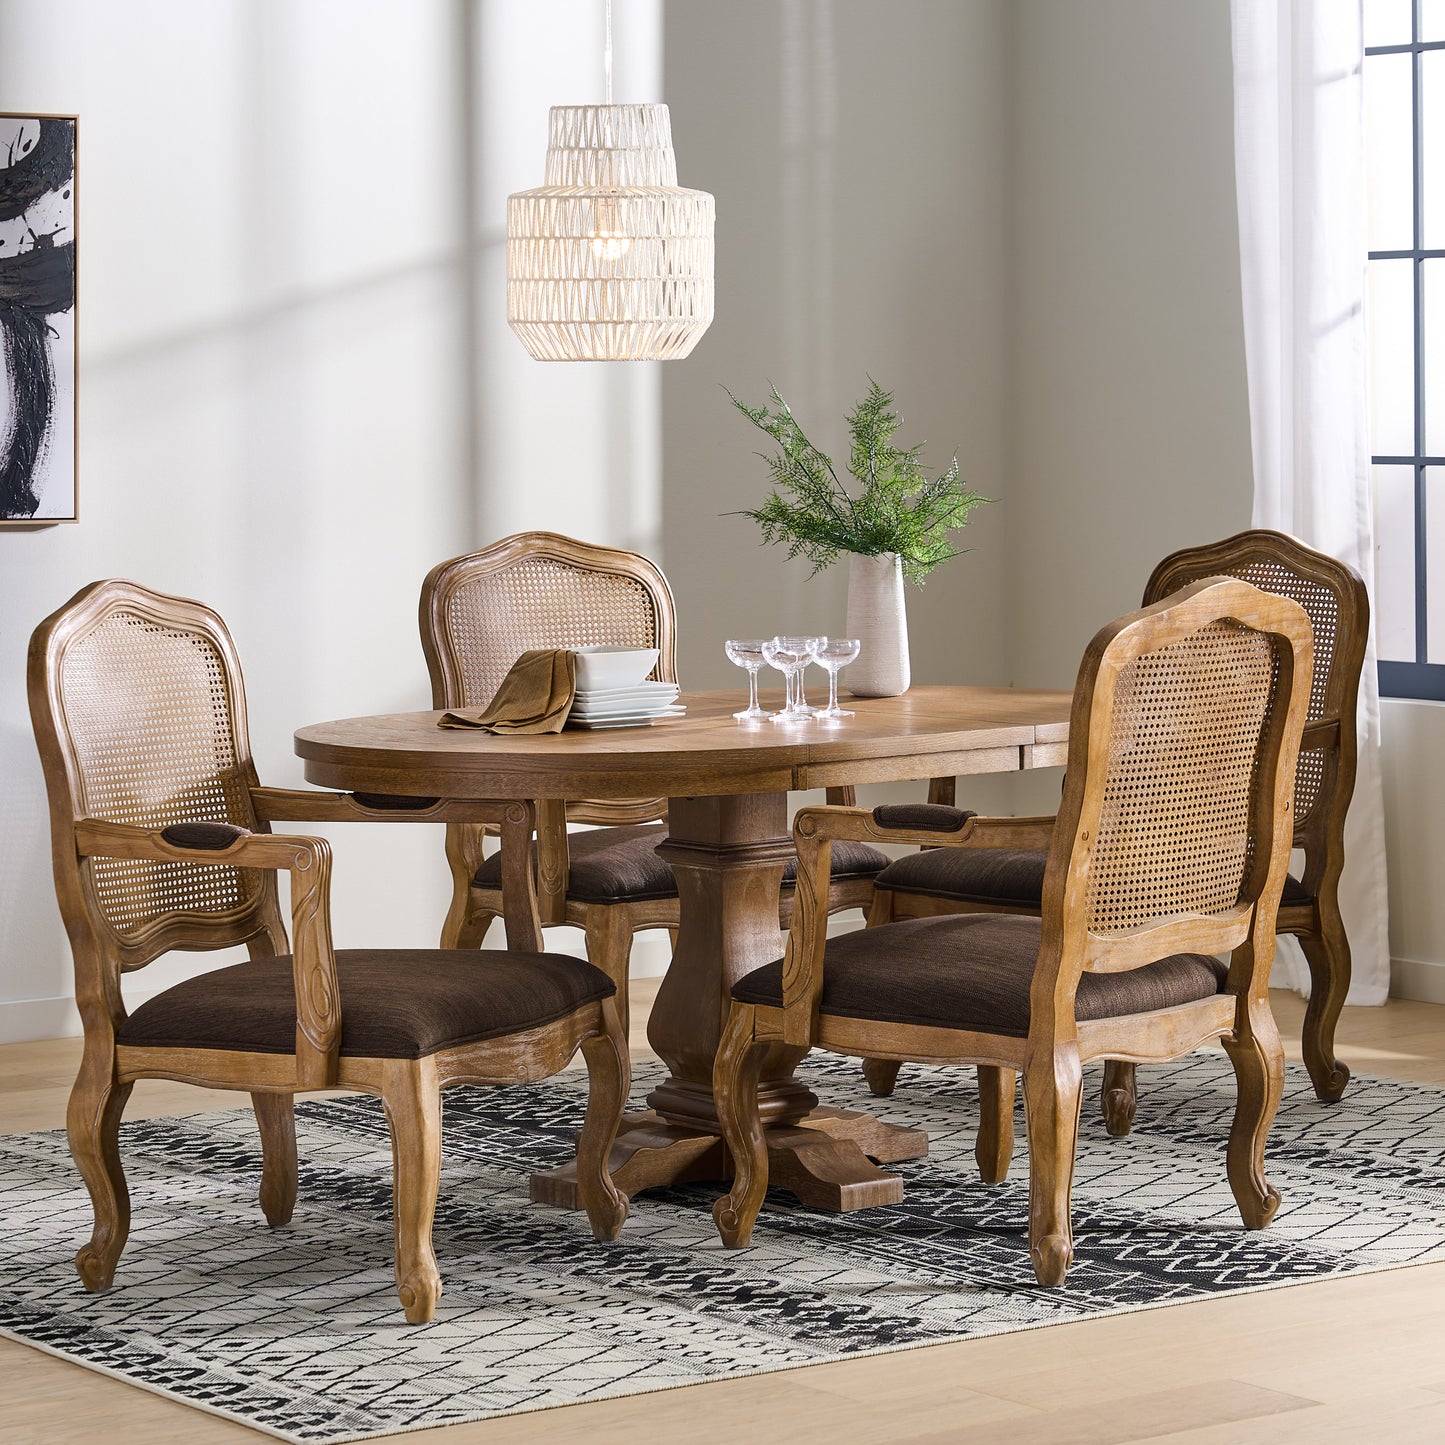 Biorn French Country Wood and Cane 5-Piece Expandable Oval Dining Set